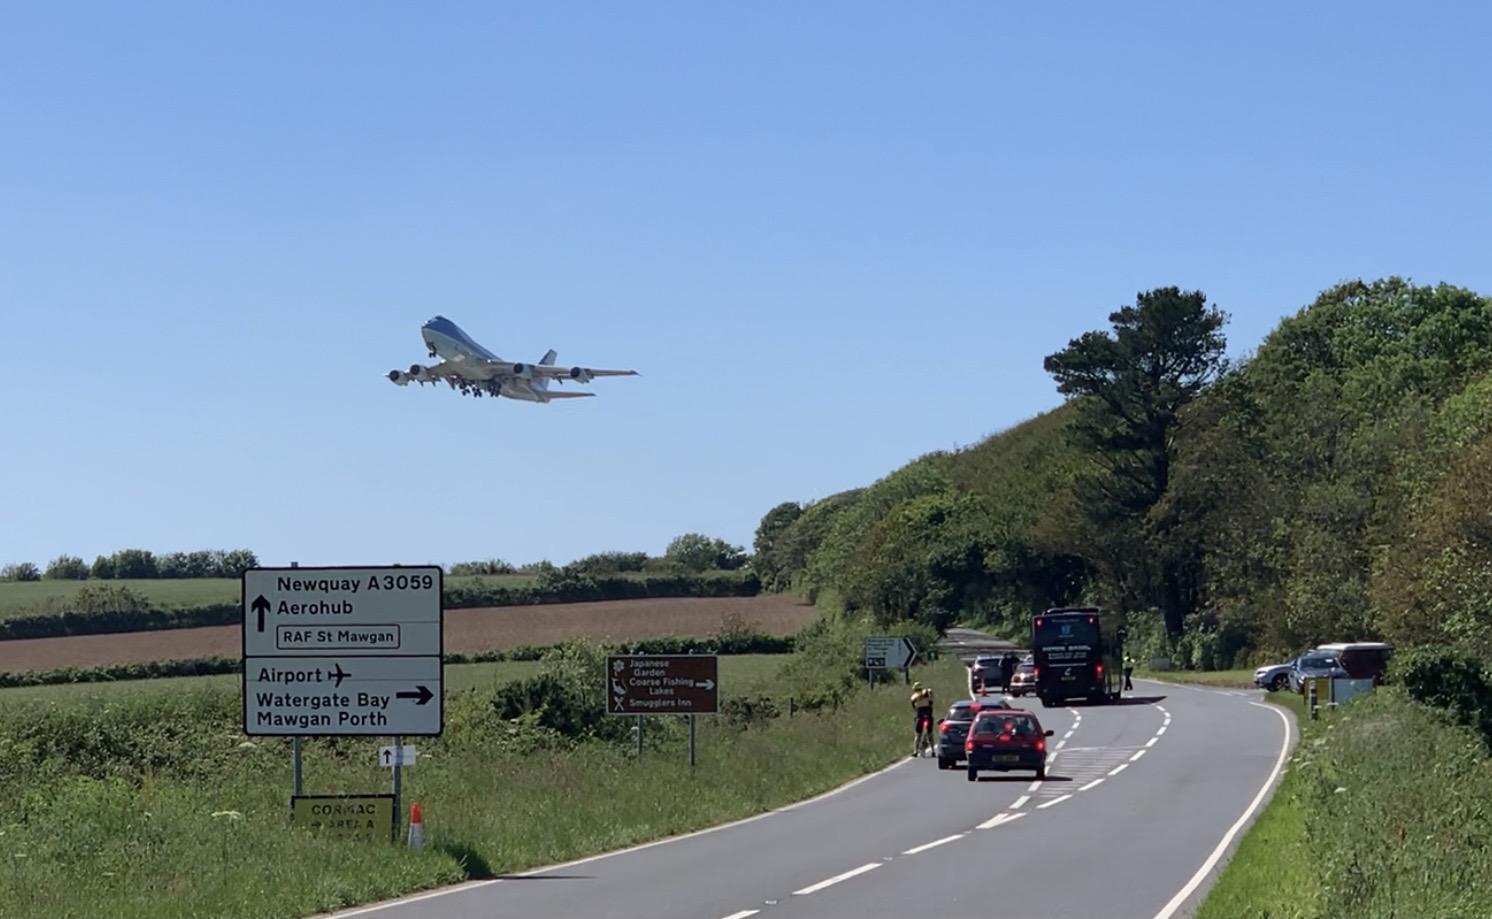 Air Force One departing the 2021 G7 Summit in Cornwall